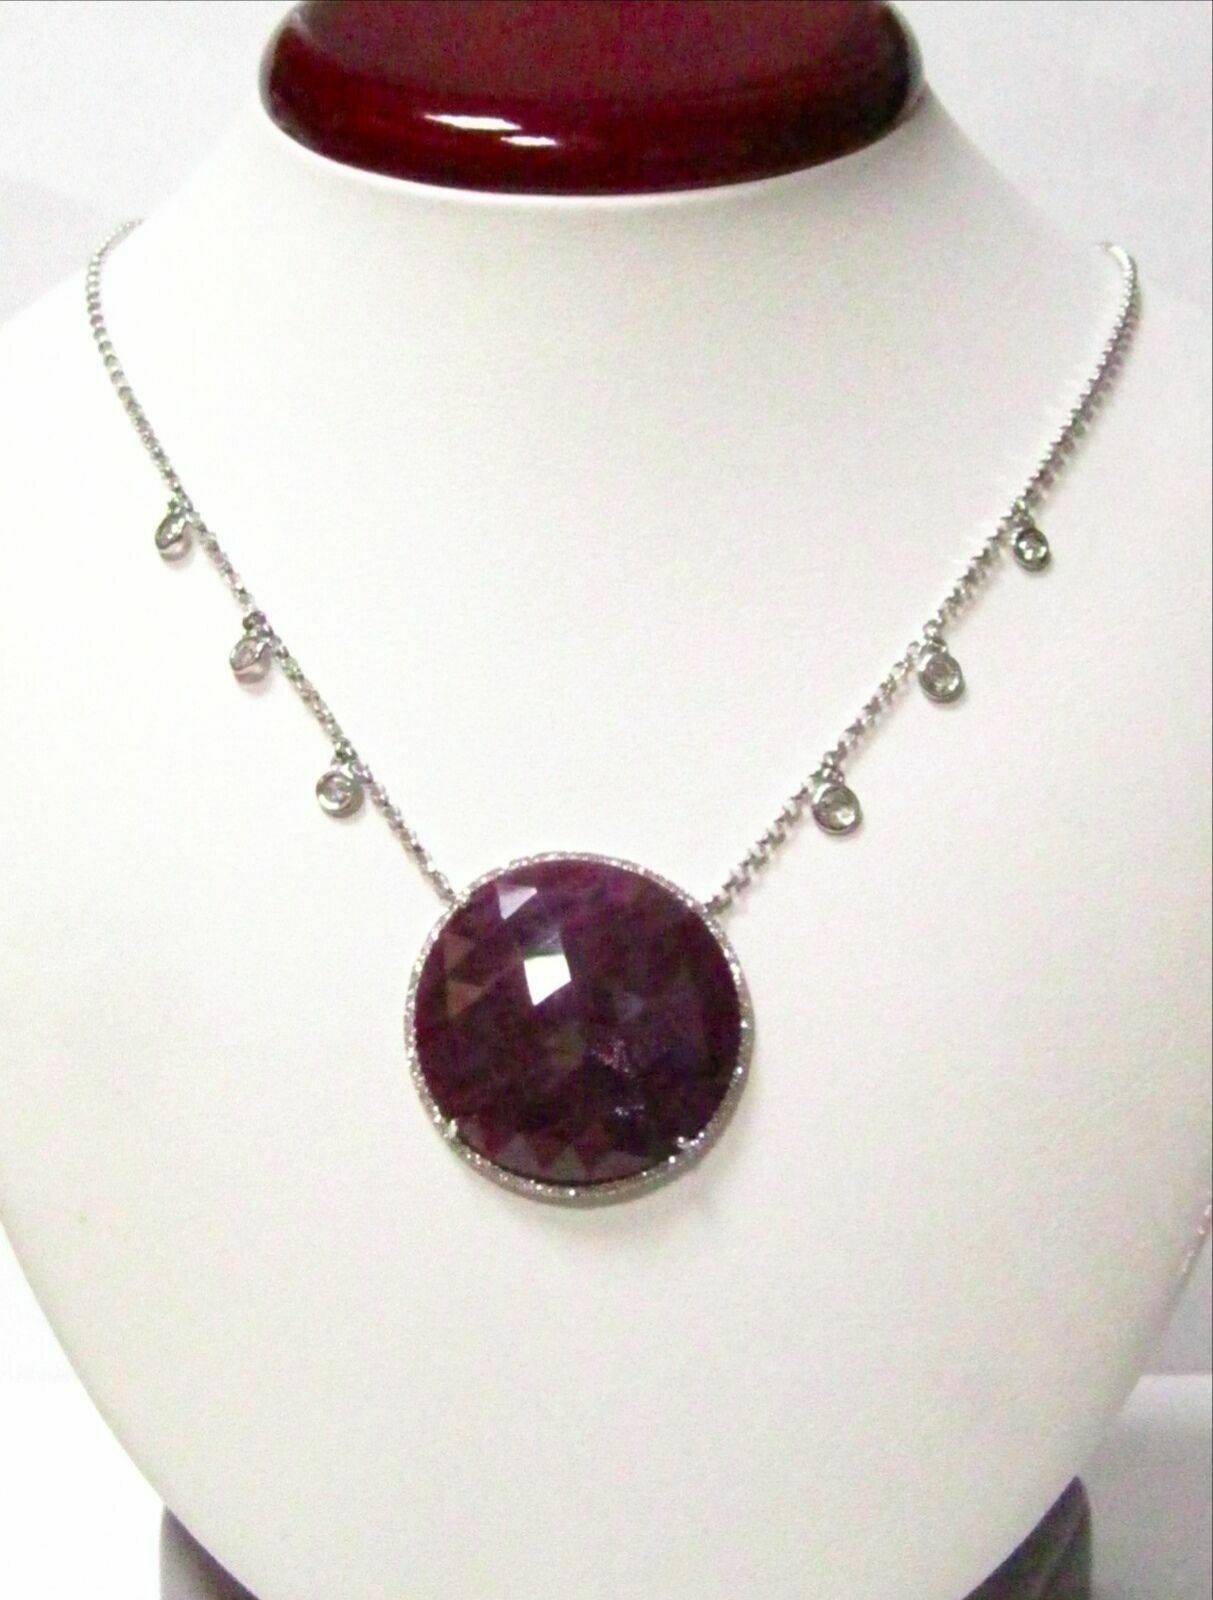 39.27 TCW Rose Cut Red Ruby & White Diamonds Pendant Necklace 14k White Gold 17"